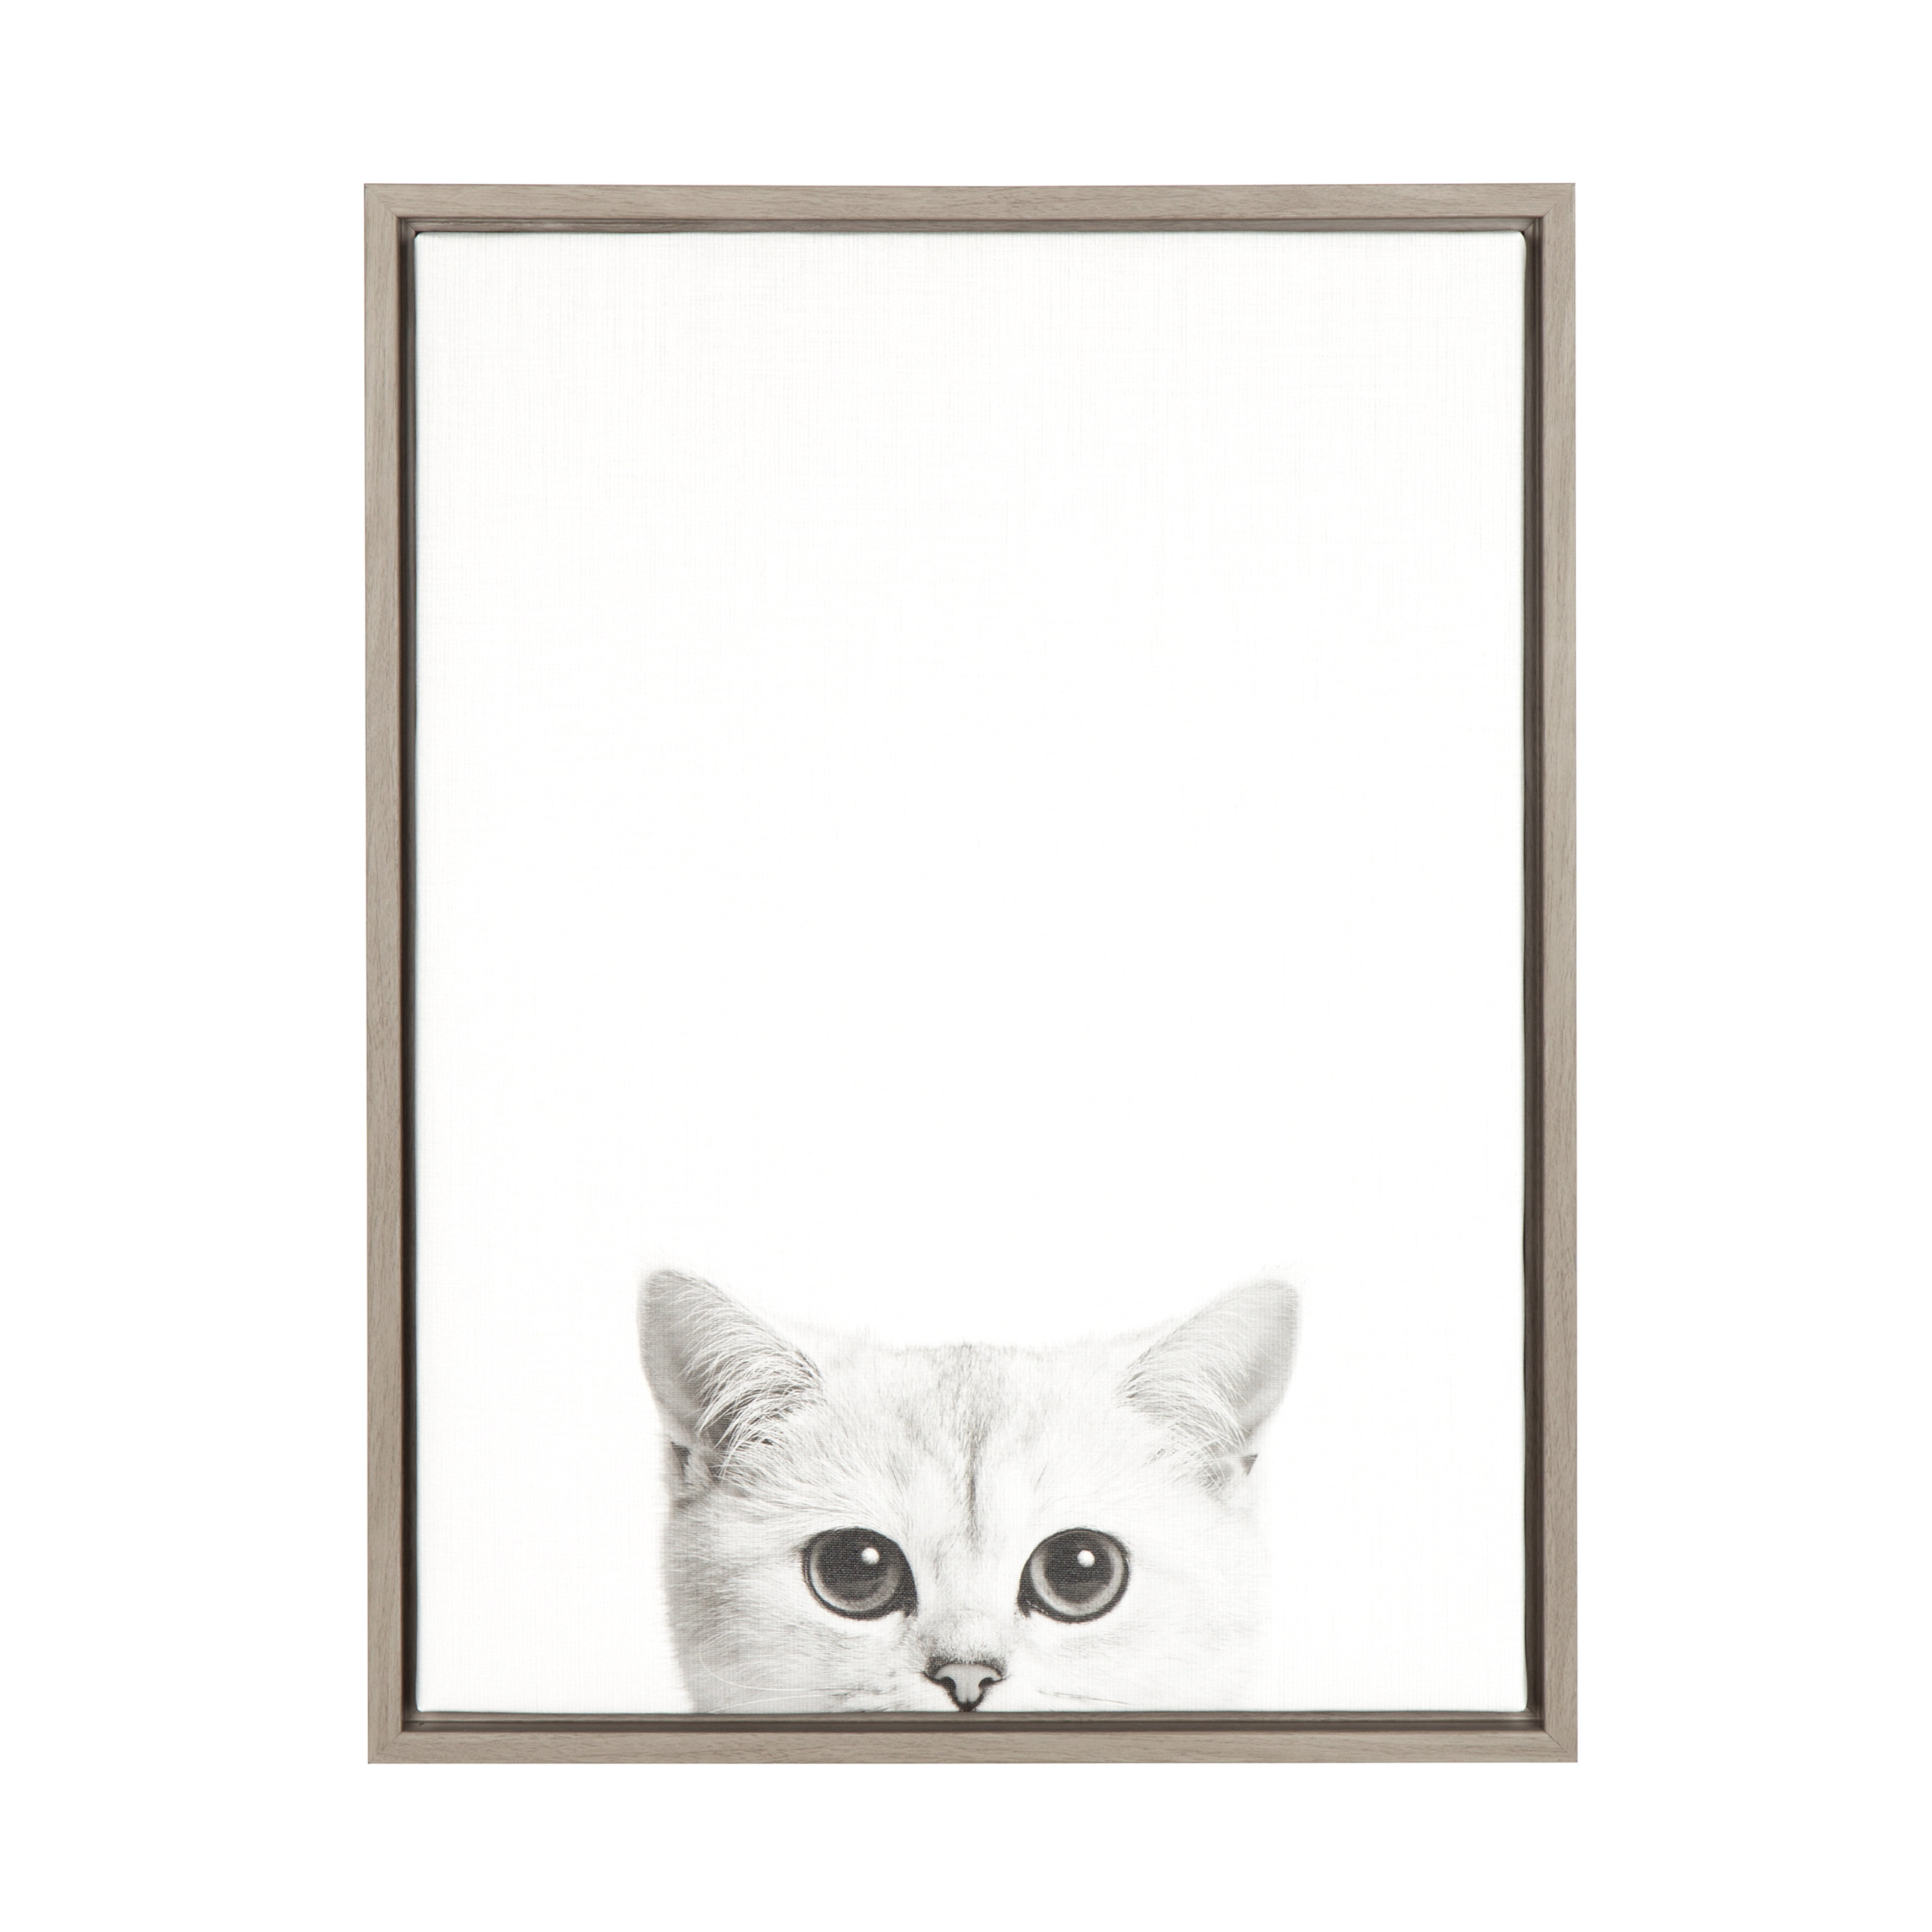 Kate and Laurel Sylvie Kitty Black and White Portrait Framed Canvas Wall Art  by Simon Te Tai, 18x24 Gray